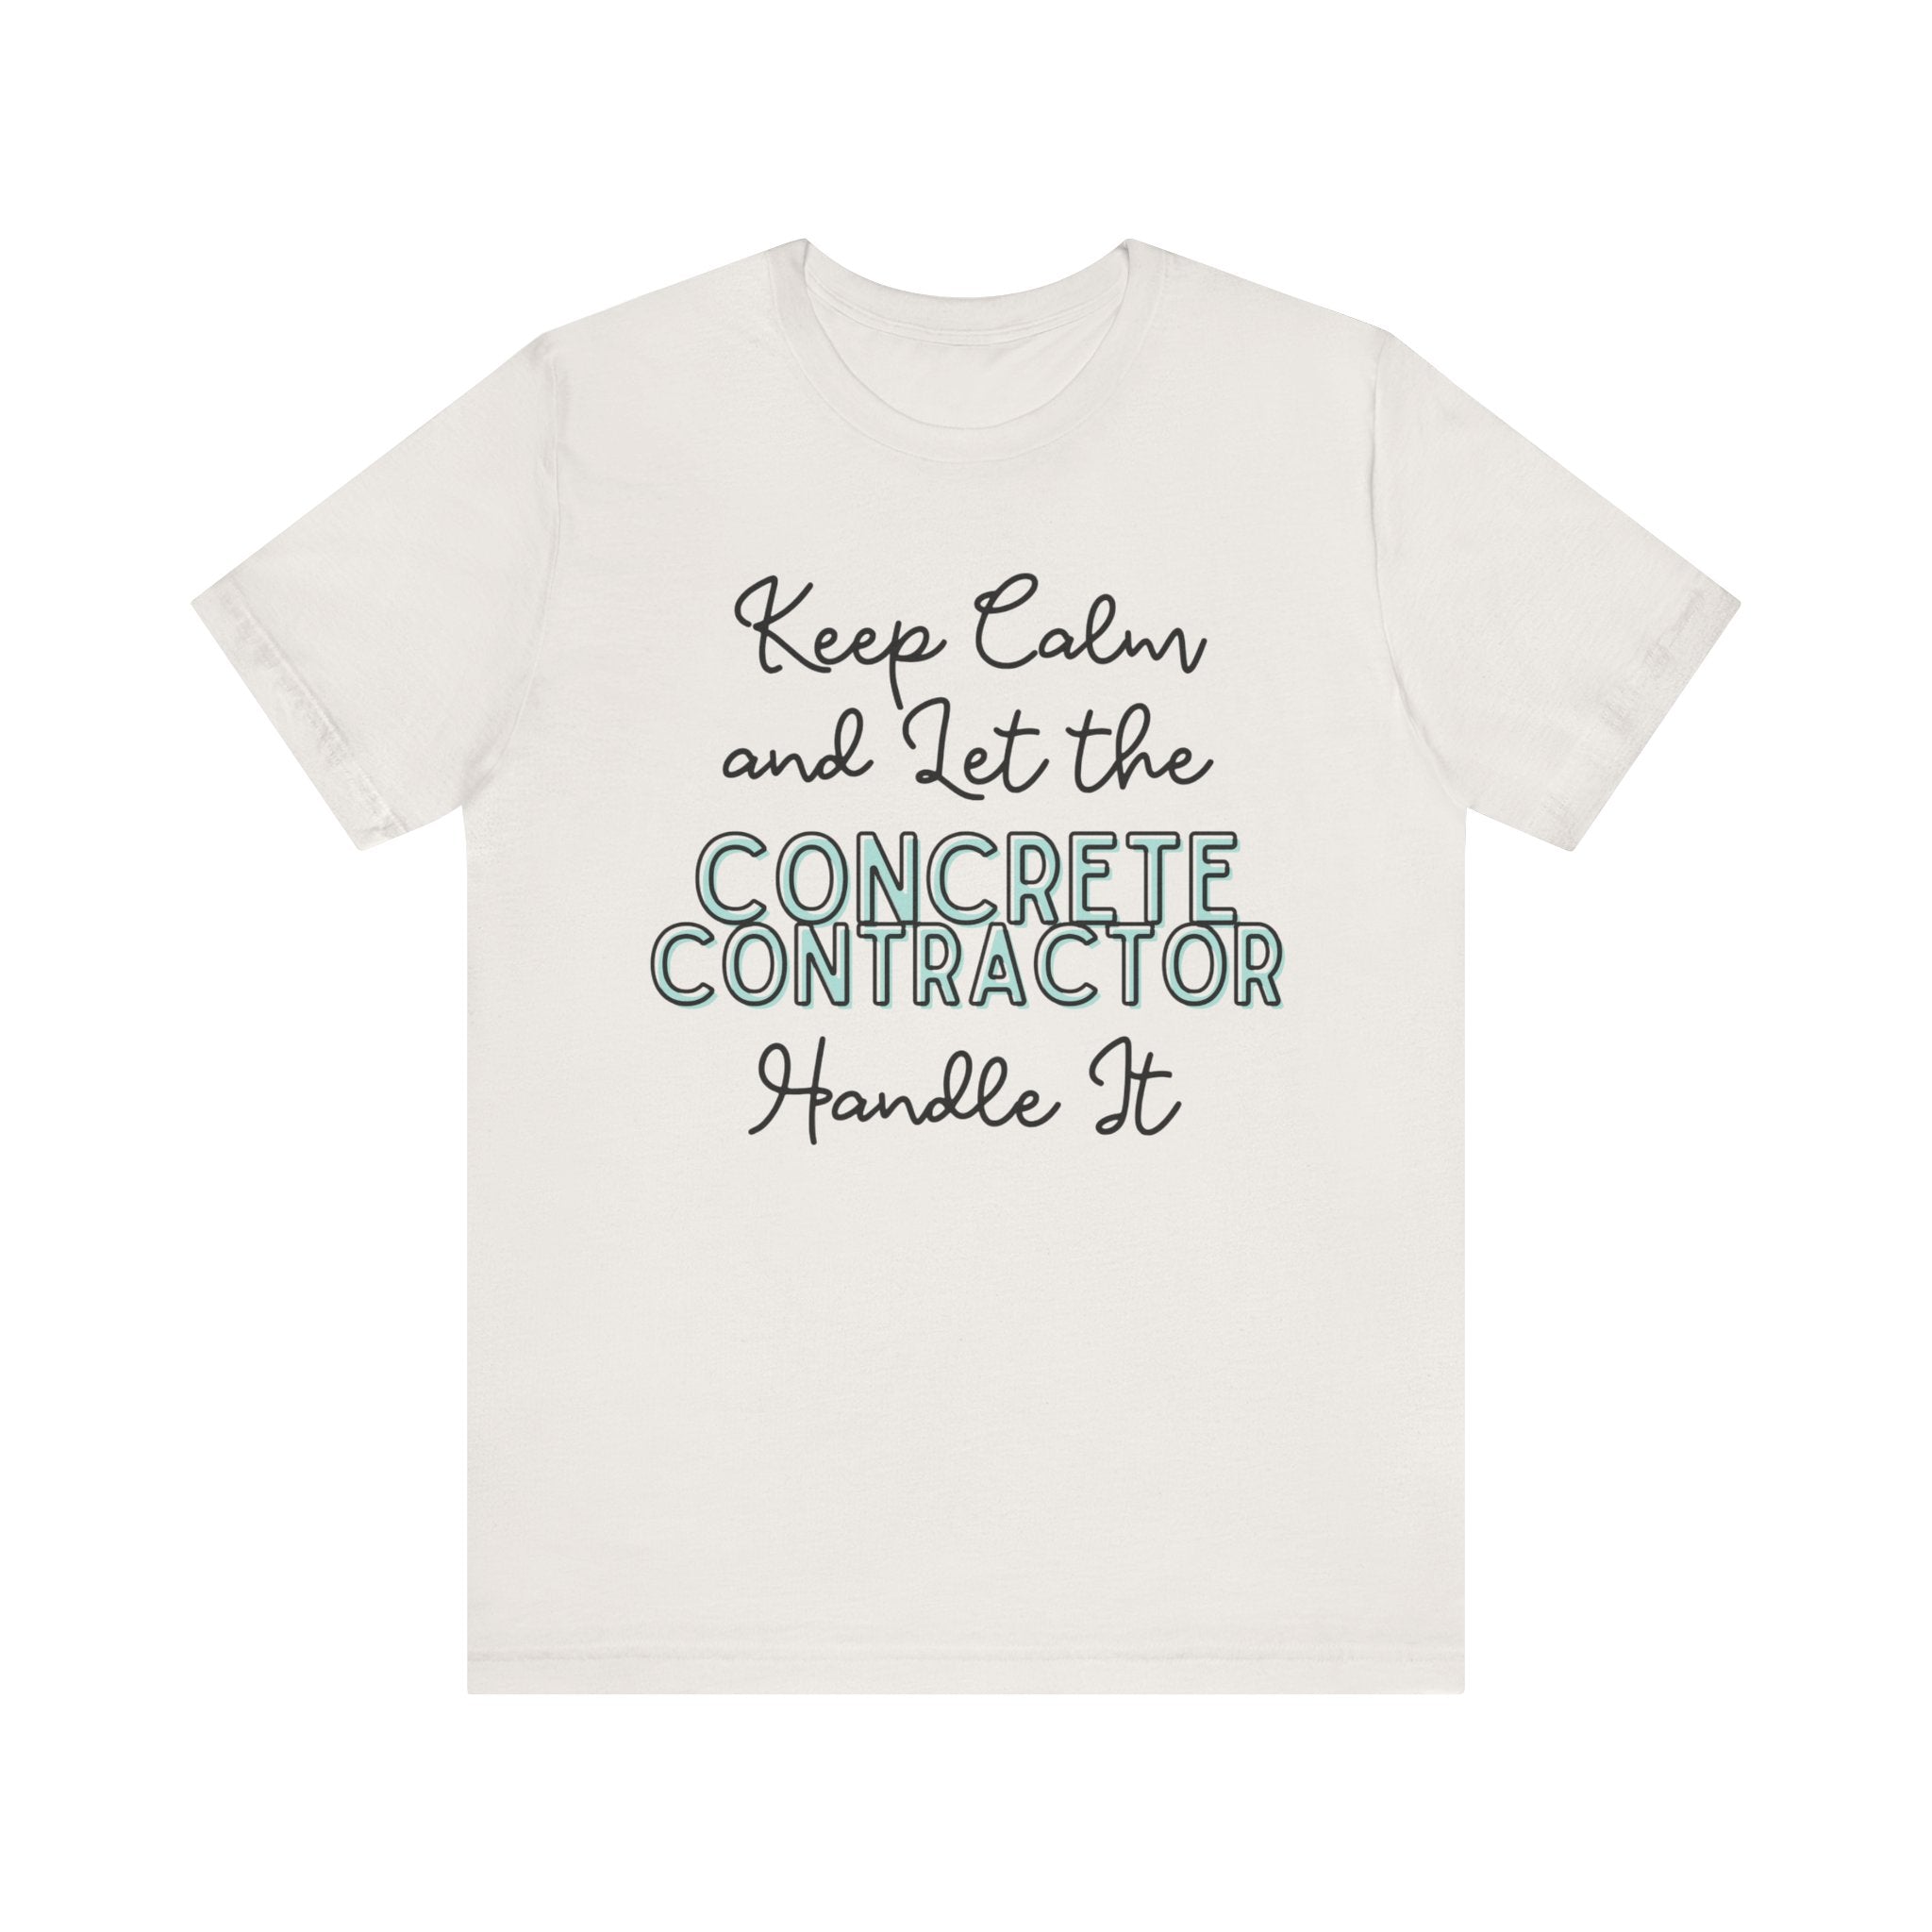 Keep Calm and let the Concrete Contractor handle It - Jersey Short Sleeve Tee